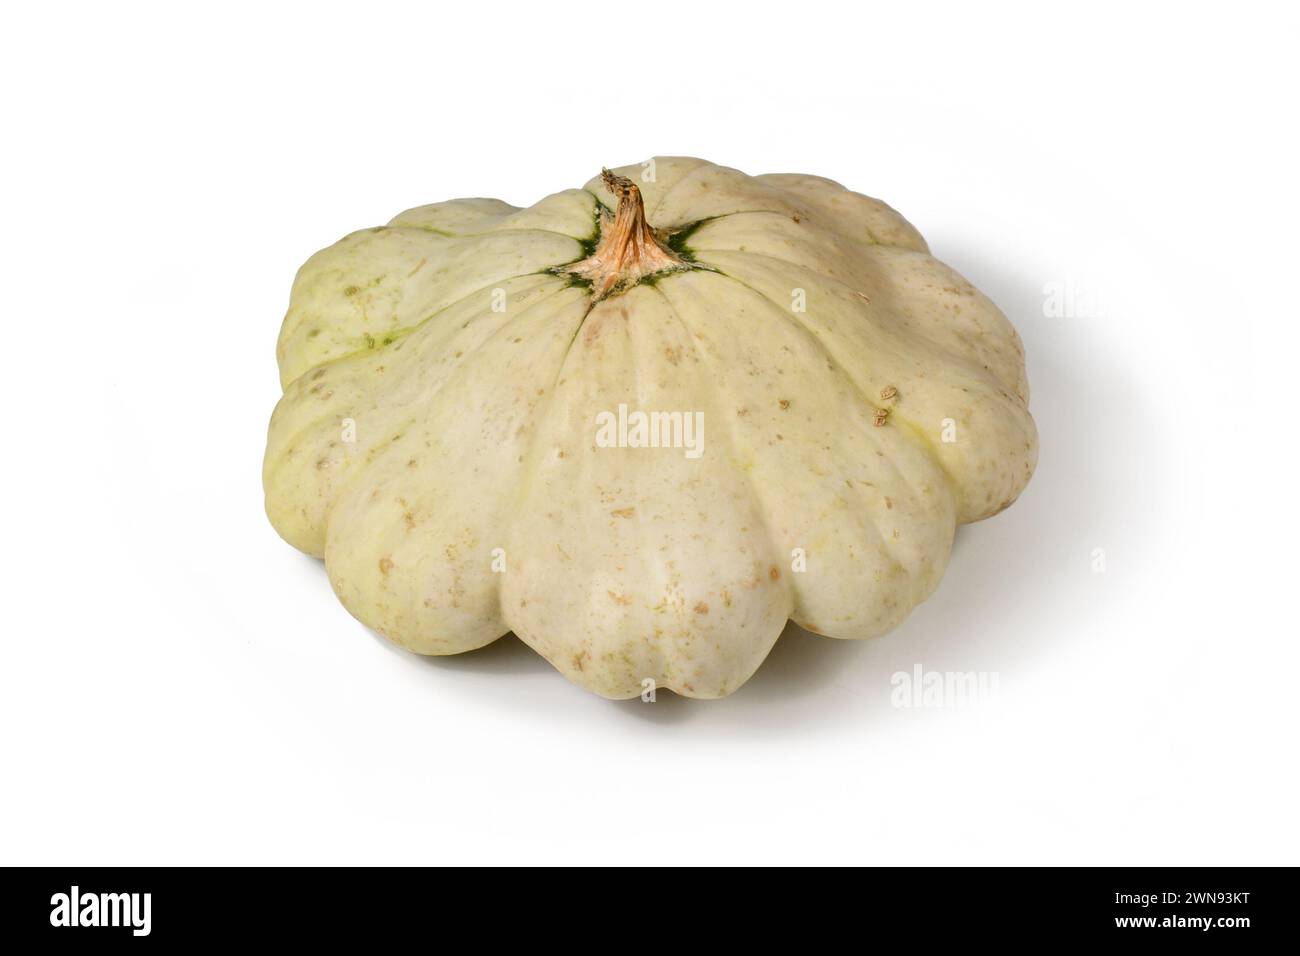 Pattypan squash with round and shallow shape and scalloped edges on white background Stock Photo